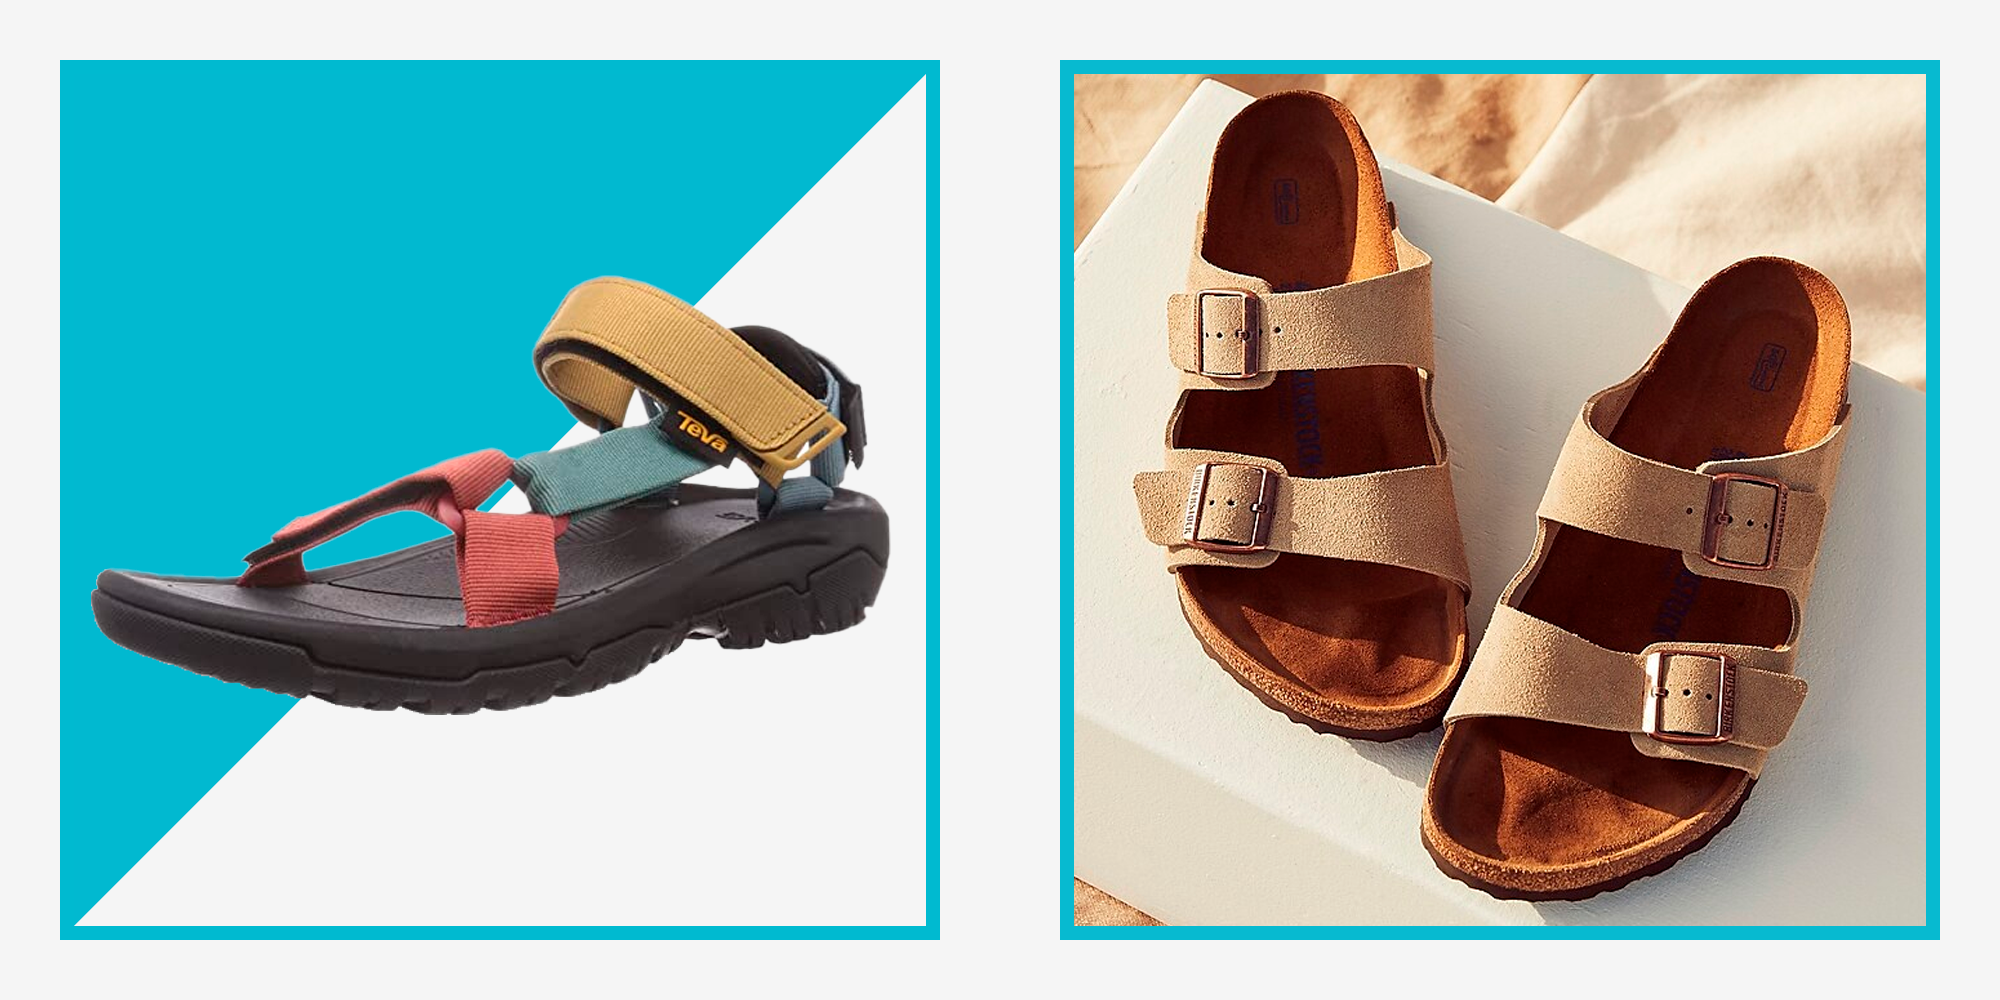 menshealth.com - These Great-Looking Sandals Will Fire up Your Summer Fits